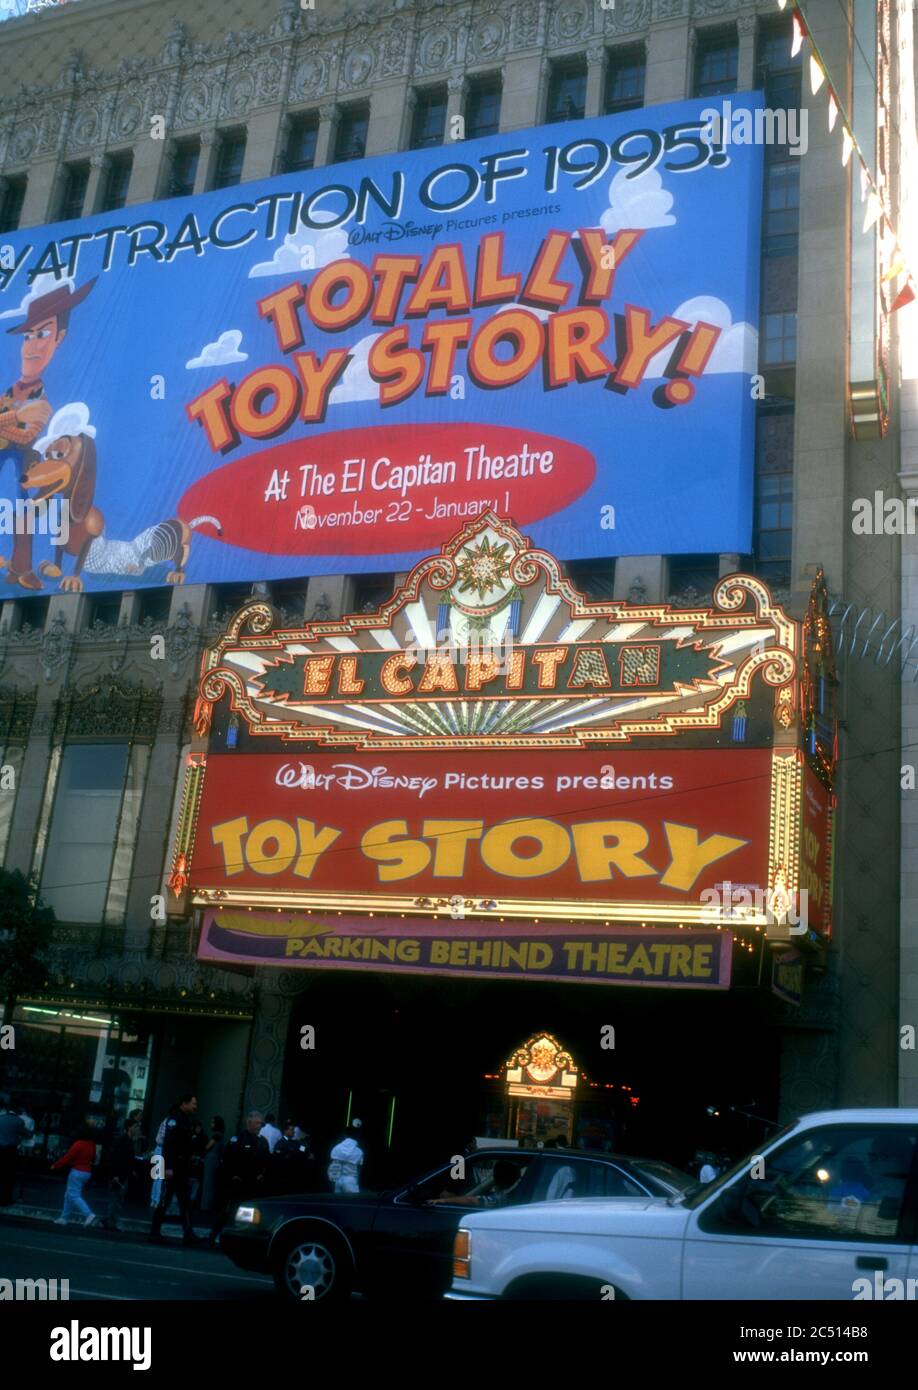 toy story 1 premiere